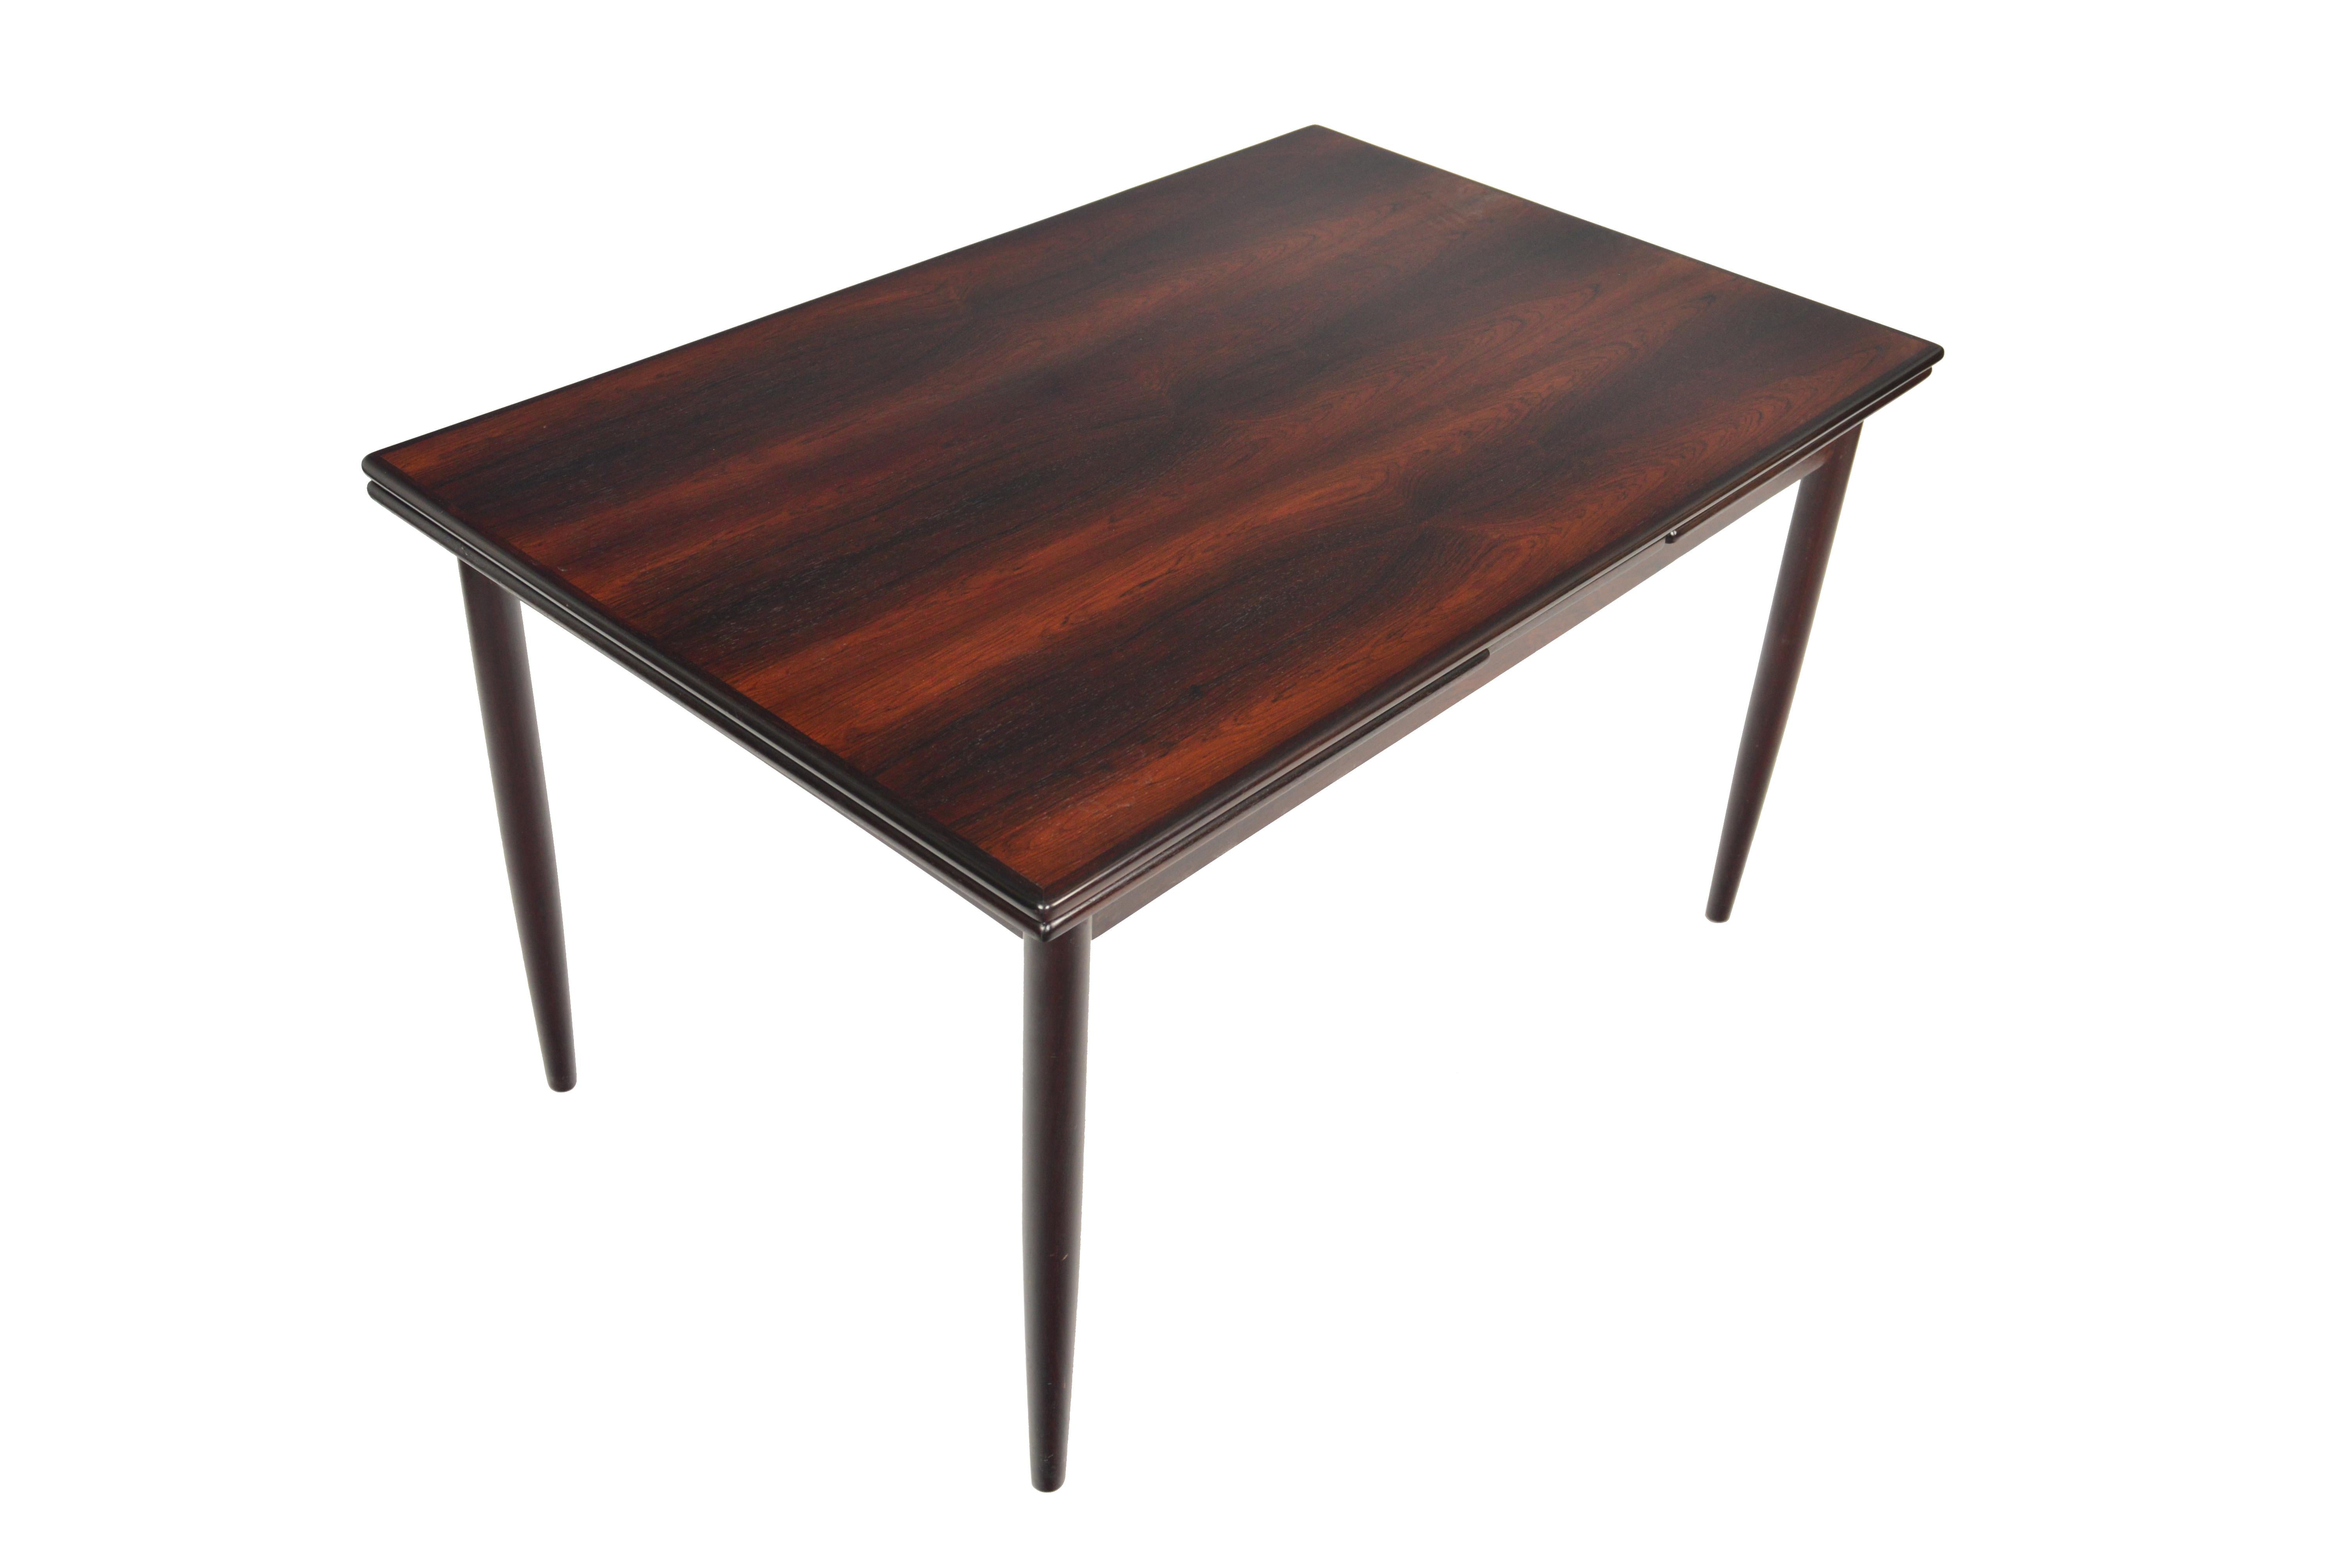 This gorgeous Danish modern Brazilian rosewood dining table offers soft banding and gorgeous wood grain. Two draw leaves pull out to almost double the size of the table for entertaining. Expands to 91